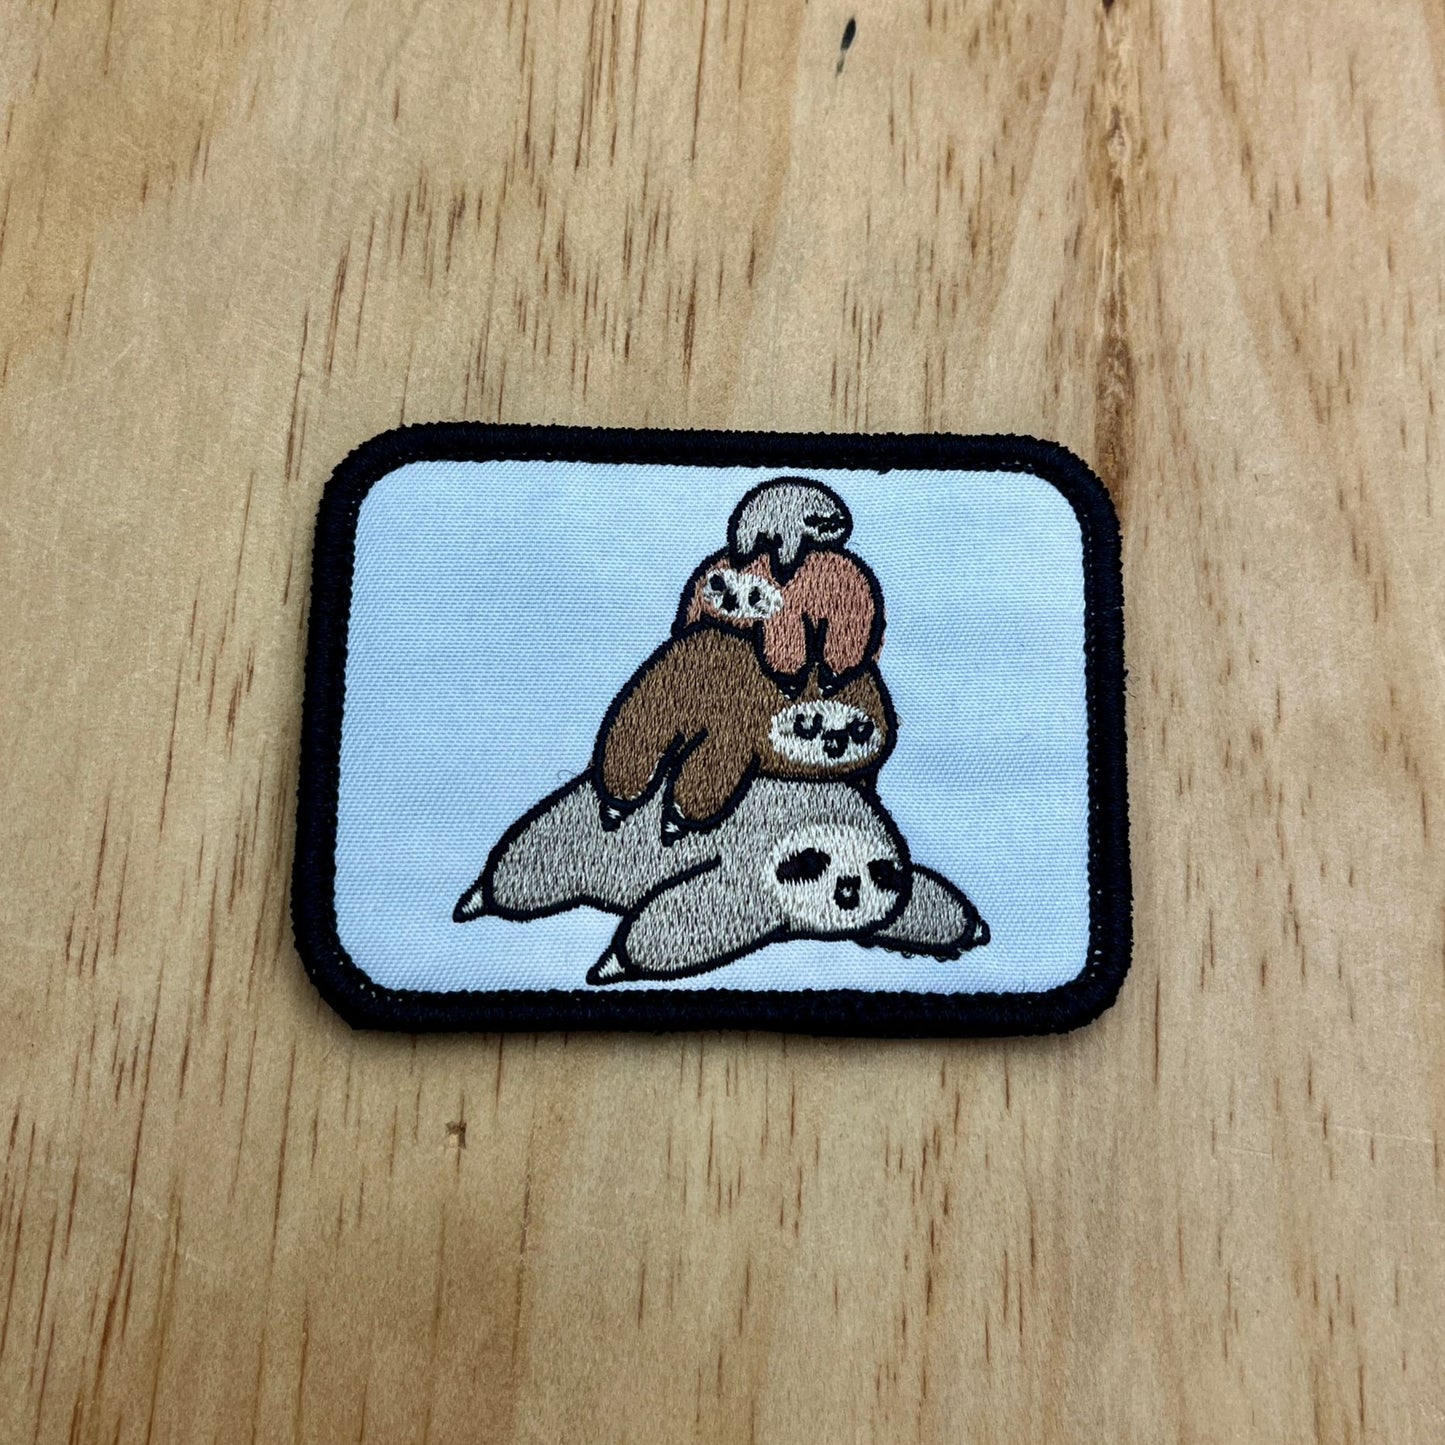 Sloth Family patch